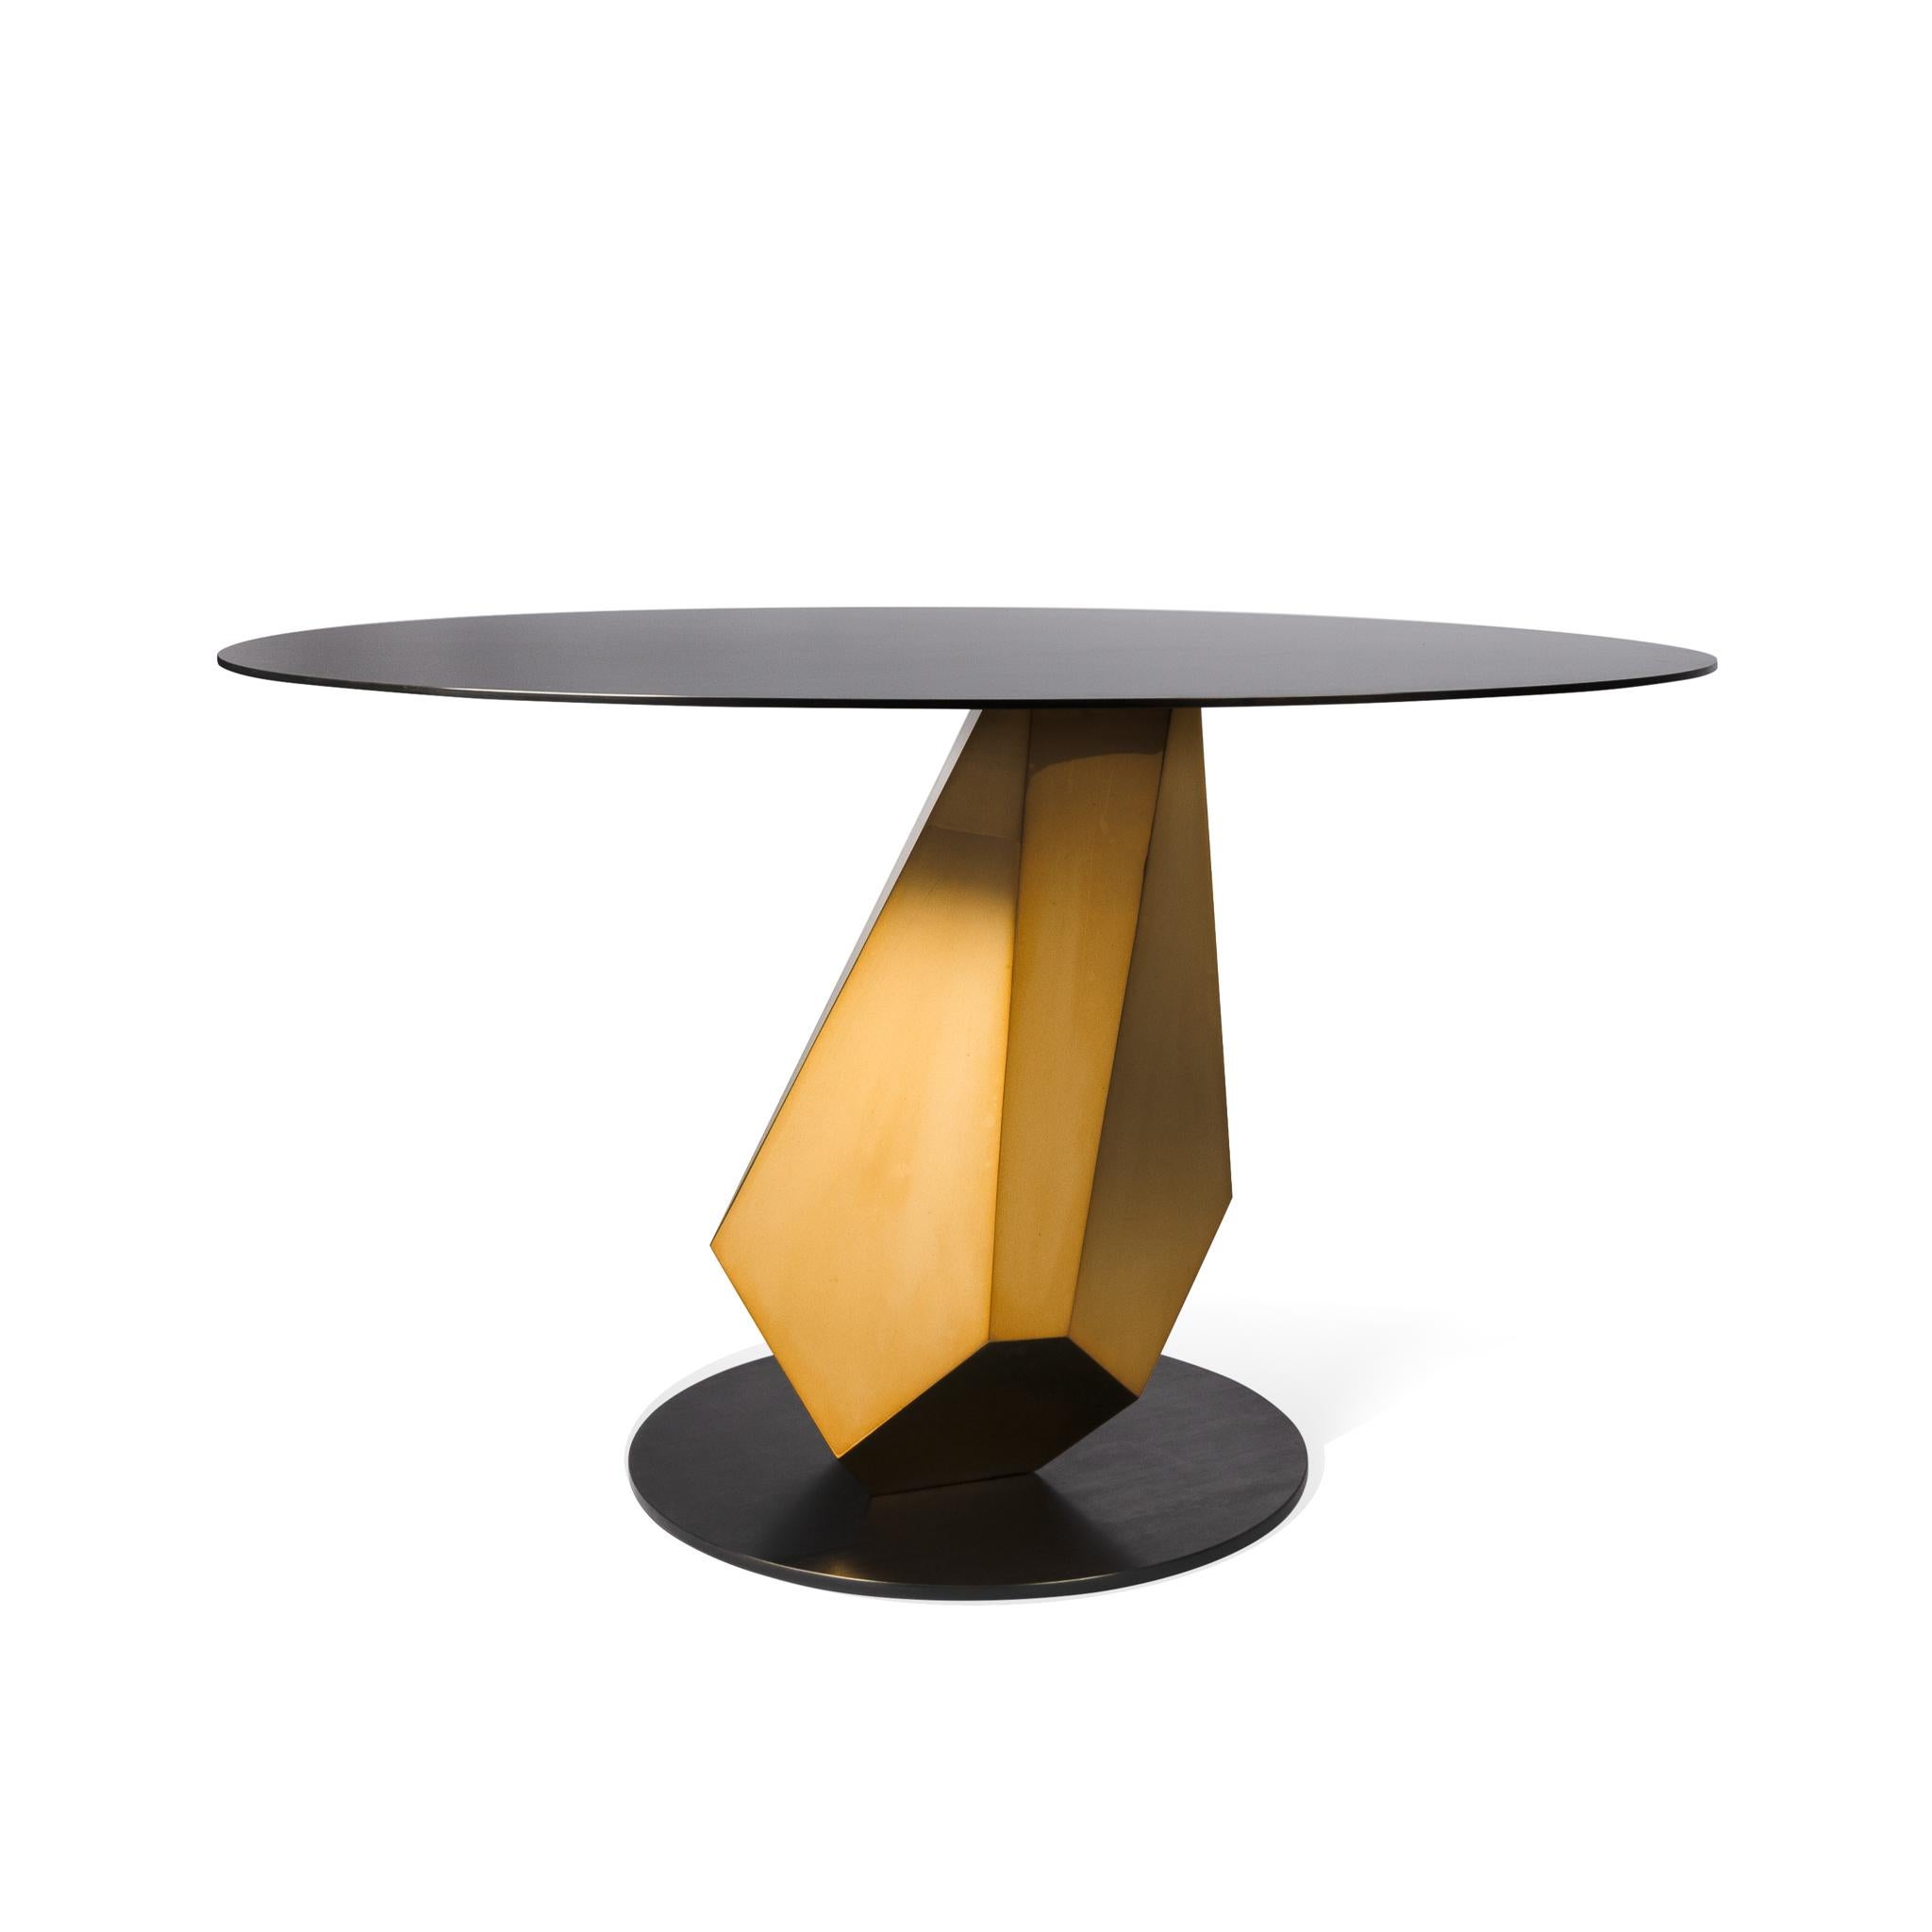 Currently 1 in Stock, Ready to Ships within 2-3 Days 

The Madison table is an opulent piece of furniture that exemplifies the blending of functionality with sculpture. The base explore balance and natural geometric forms, while supporting a modern